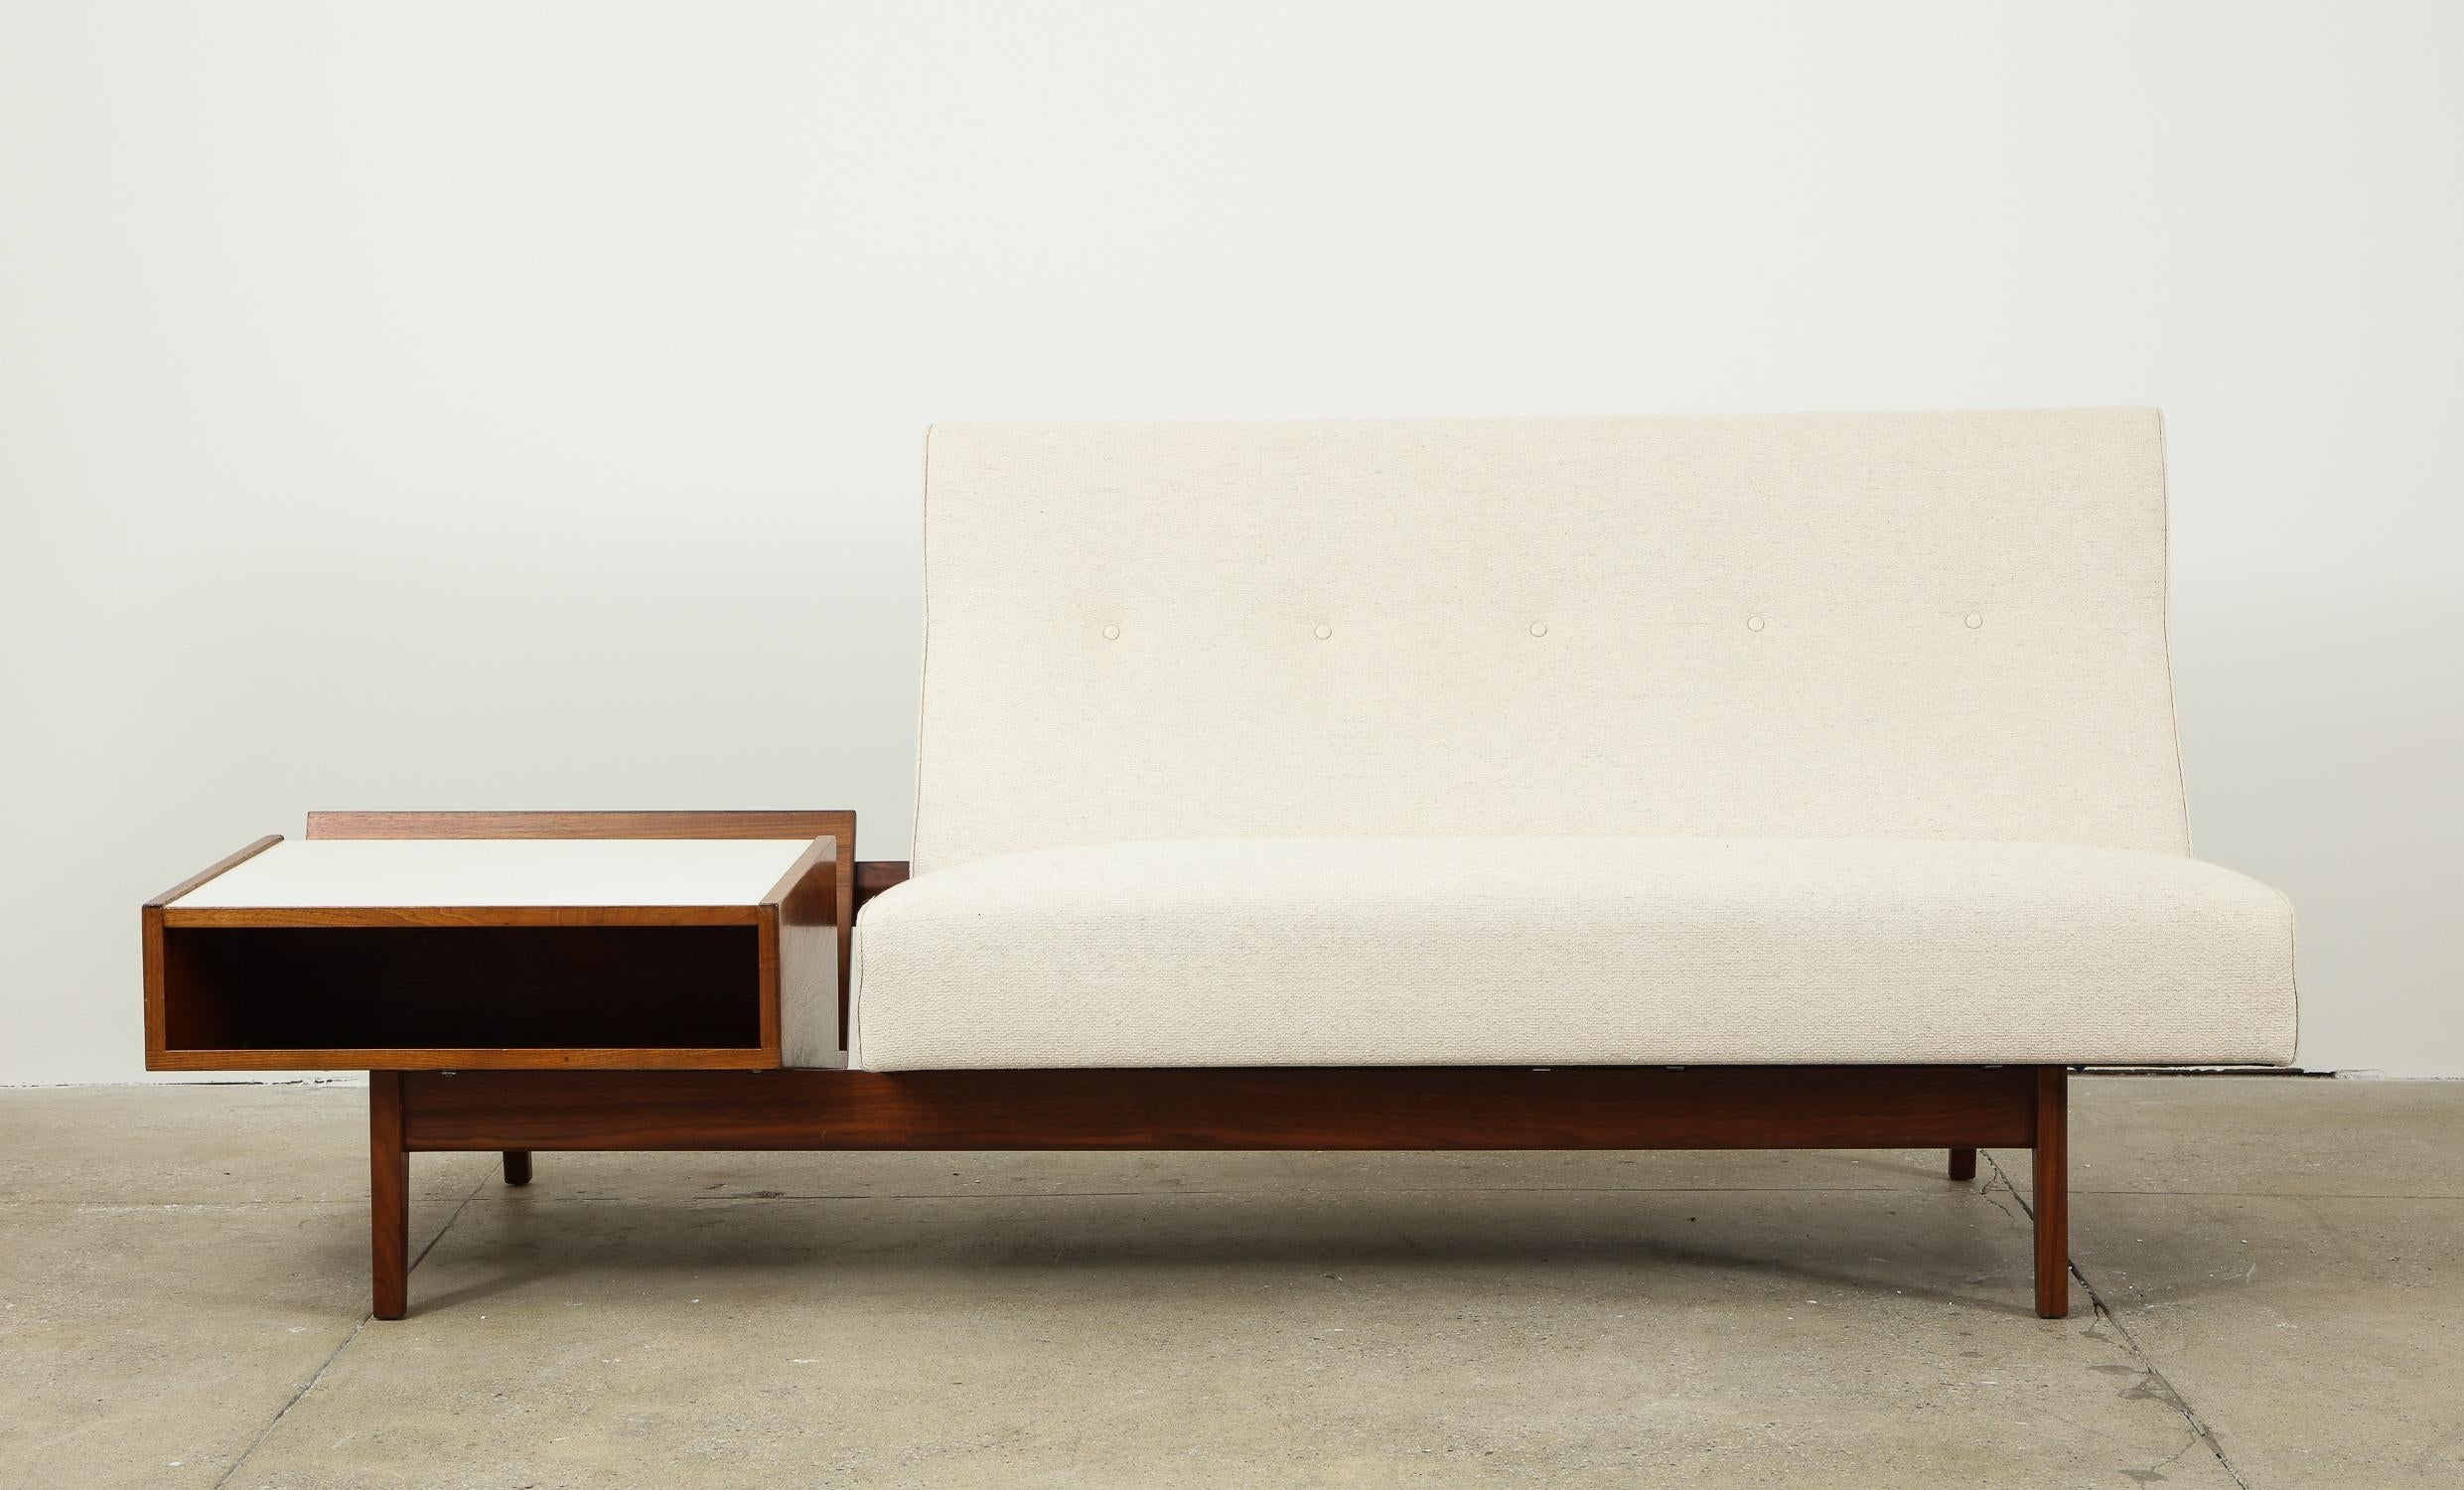 Jens Risom two-seat armless sofa with attached magazine table produced, circa 1958. The frame is walnut; the magazine table has its original white micarta top. A sleekly handsome and uncommon Risom design, shown in his eponymous catalog (Jens Risom